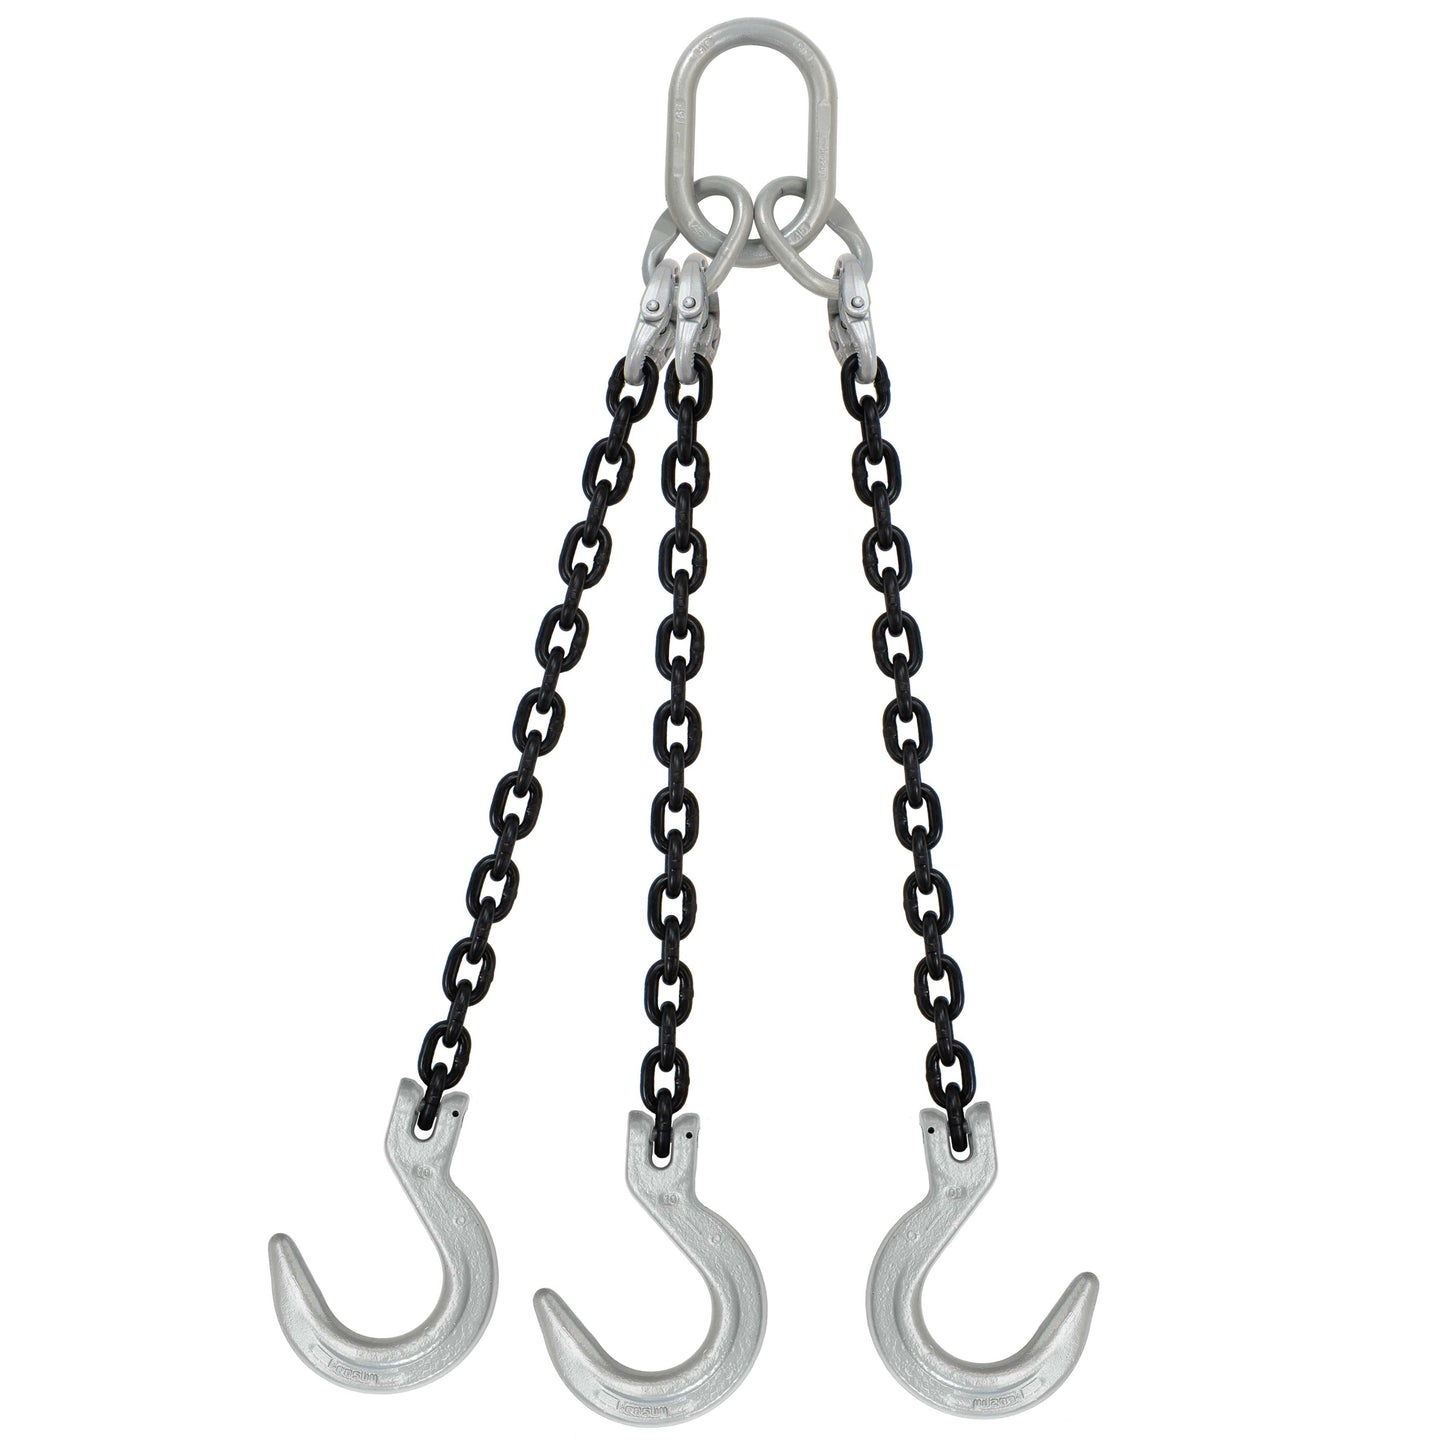 12 inch x 14 foot Domestic 3 Leg Chain Sling w Crosby Foundry Hooks Grade 100 image 1 of 2